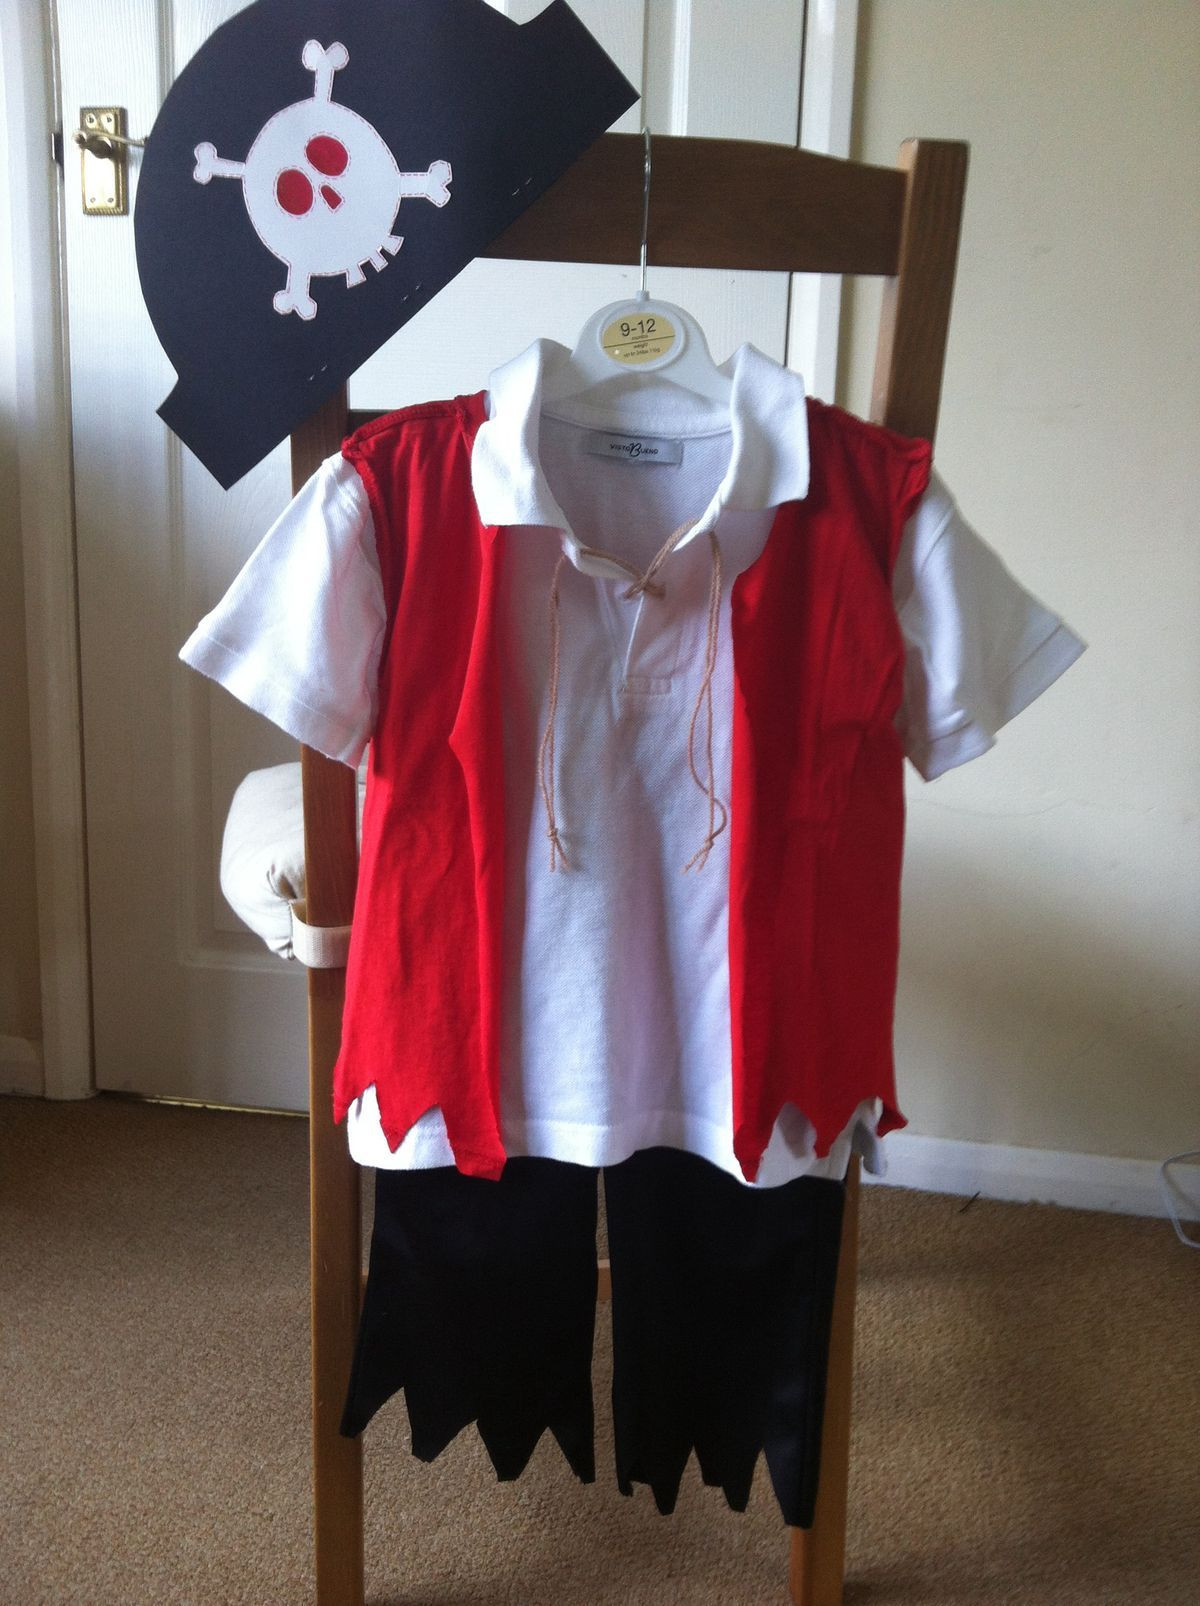 DIY Toddler Pirate Costume
 Pin by Tracy Cleveland on Kid stuff